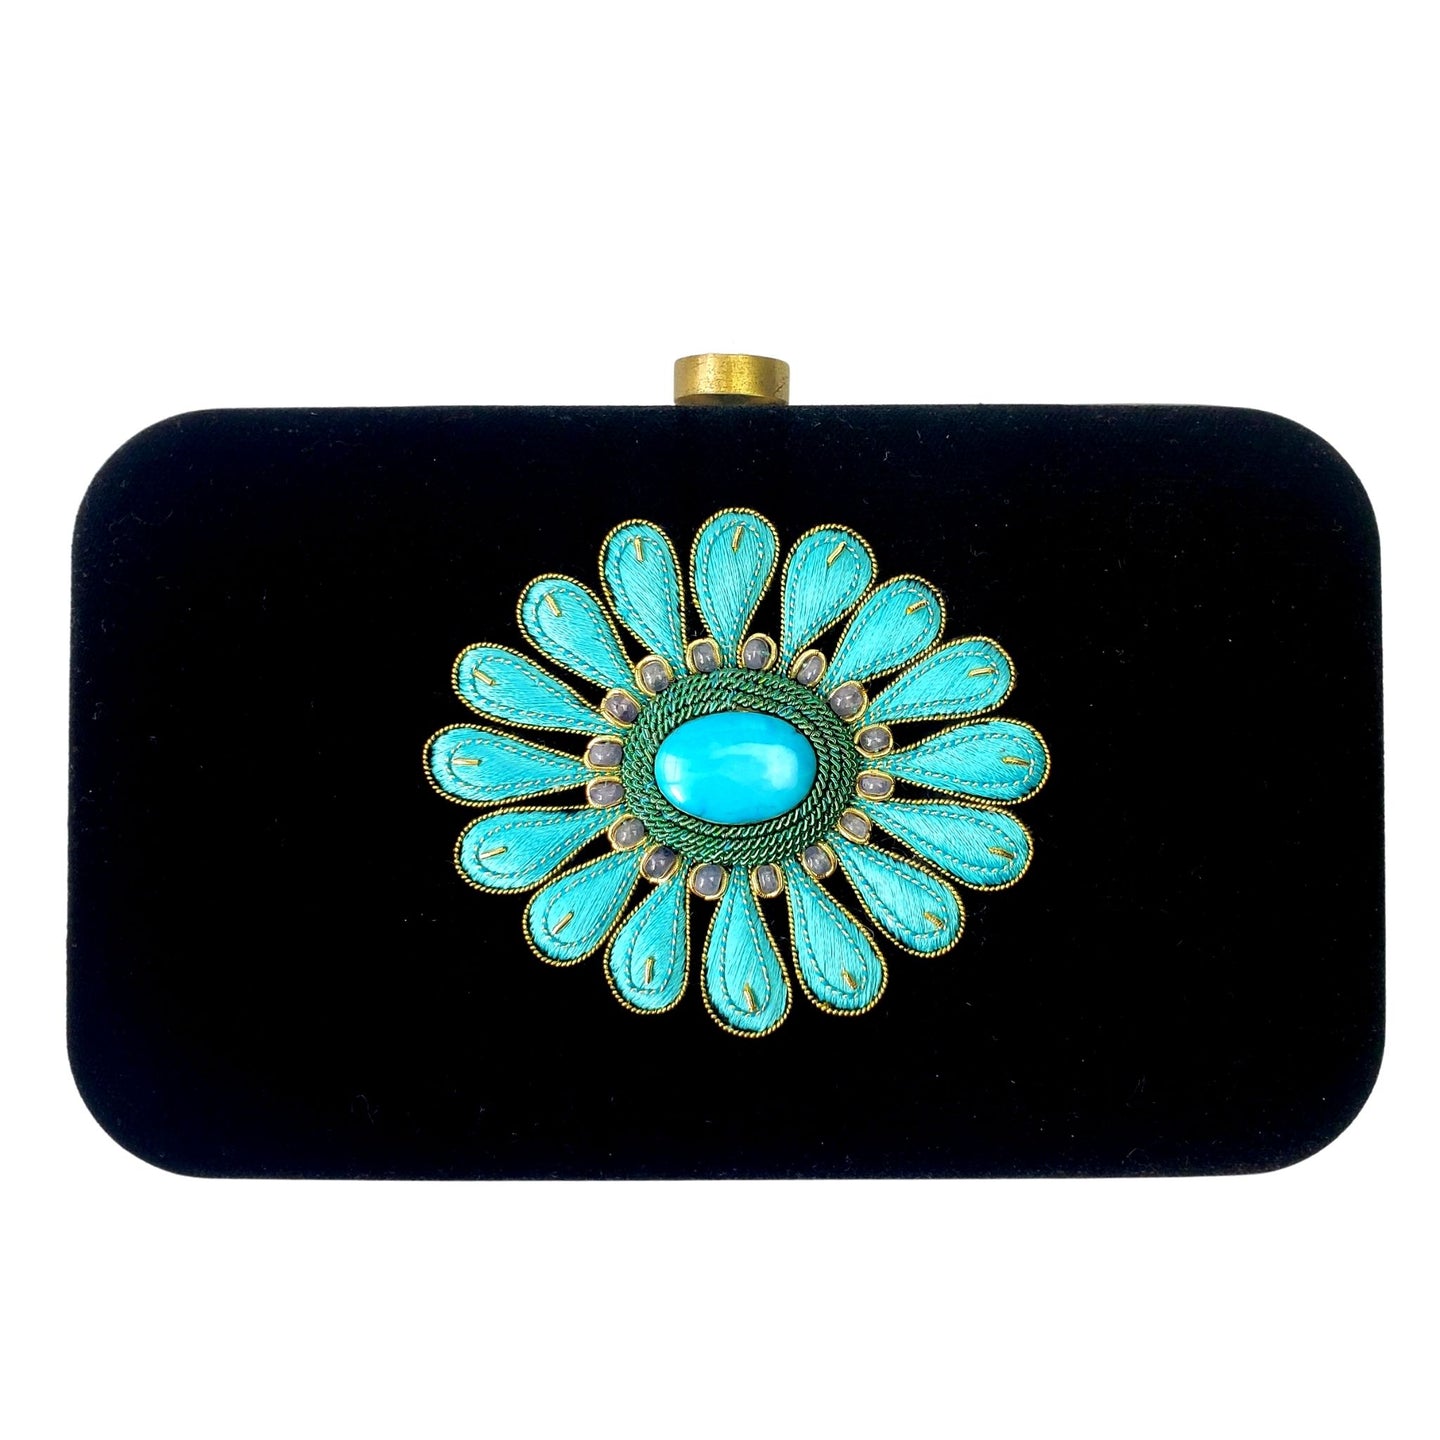 Turquoise flower hand embroidered on black velvet hard case clutch bag and embellished with turquoise stone, zardozi purse.